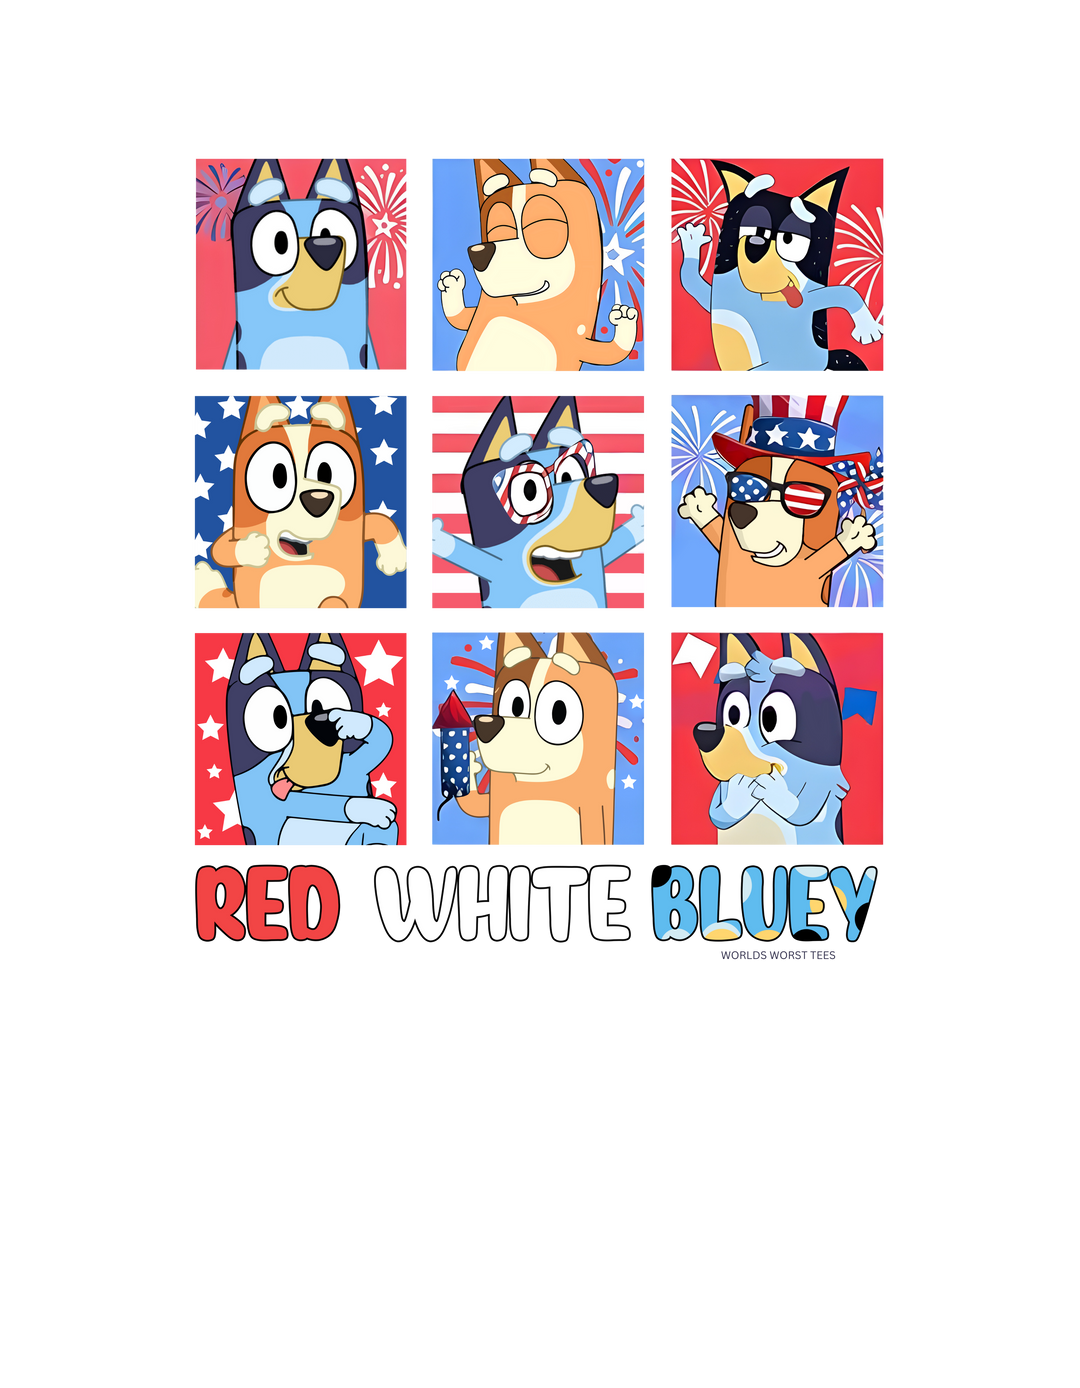 Red White and Bluey Toddler Tee featuring a cartoon dog design, perfect for sensitive skin. Made of 100% combed ringspun cotton, light fabric, tear-away label, and a classic fit. Ideal for first adventures.